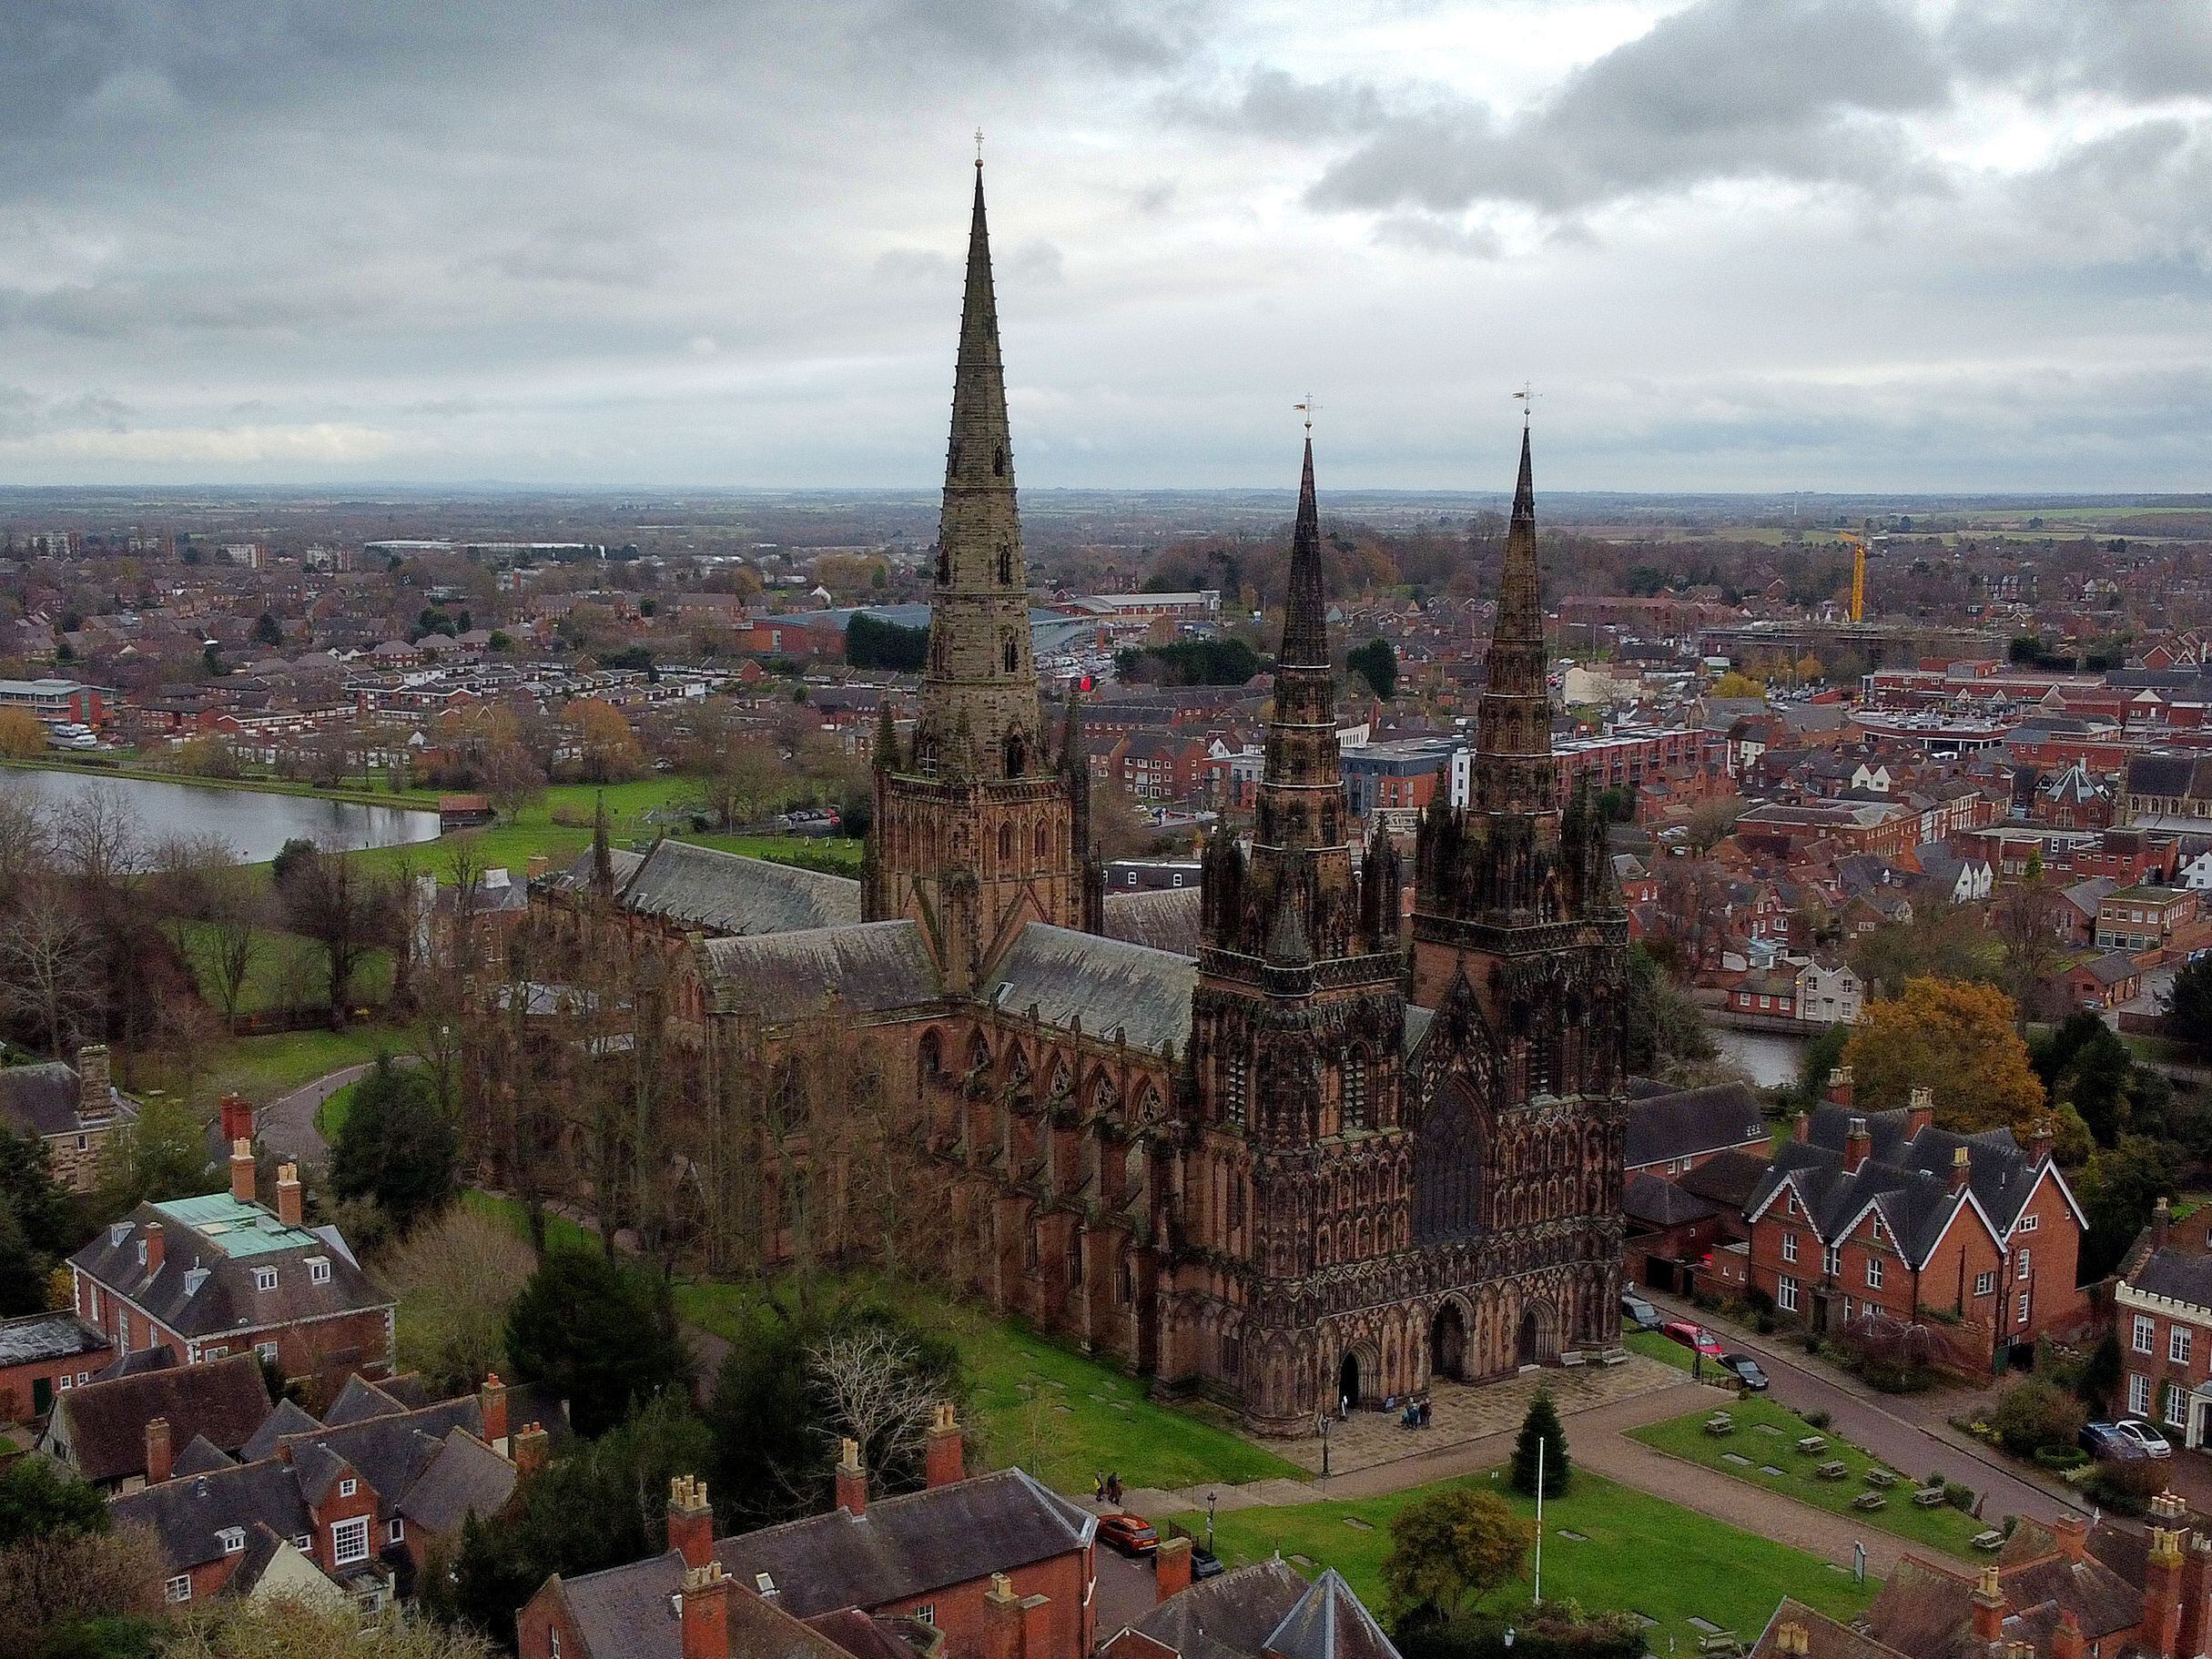 500-year-old bell returning to Lichfield Cathedral after restoration